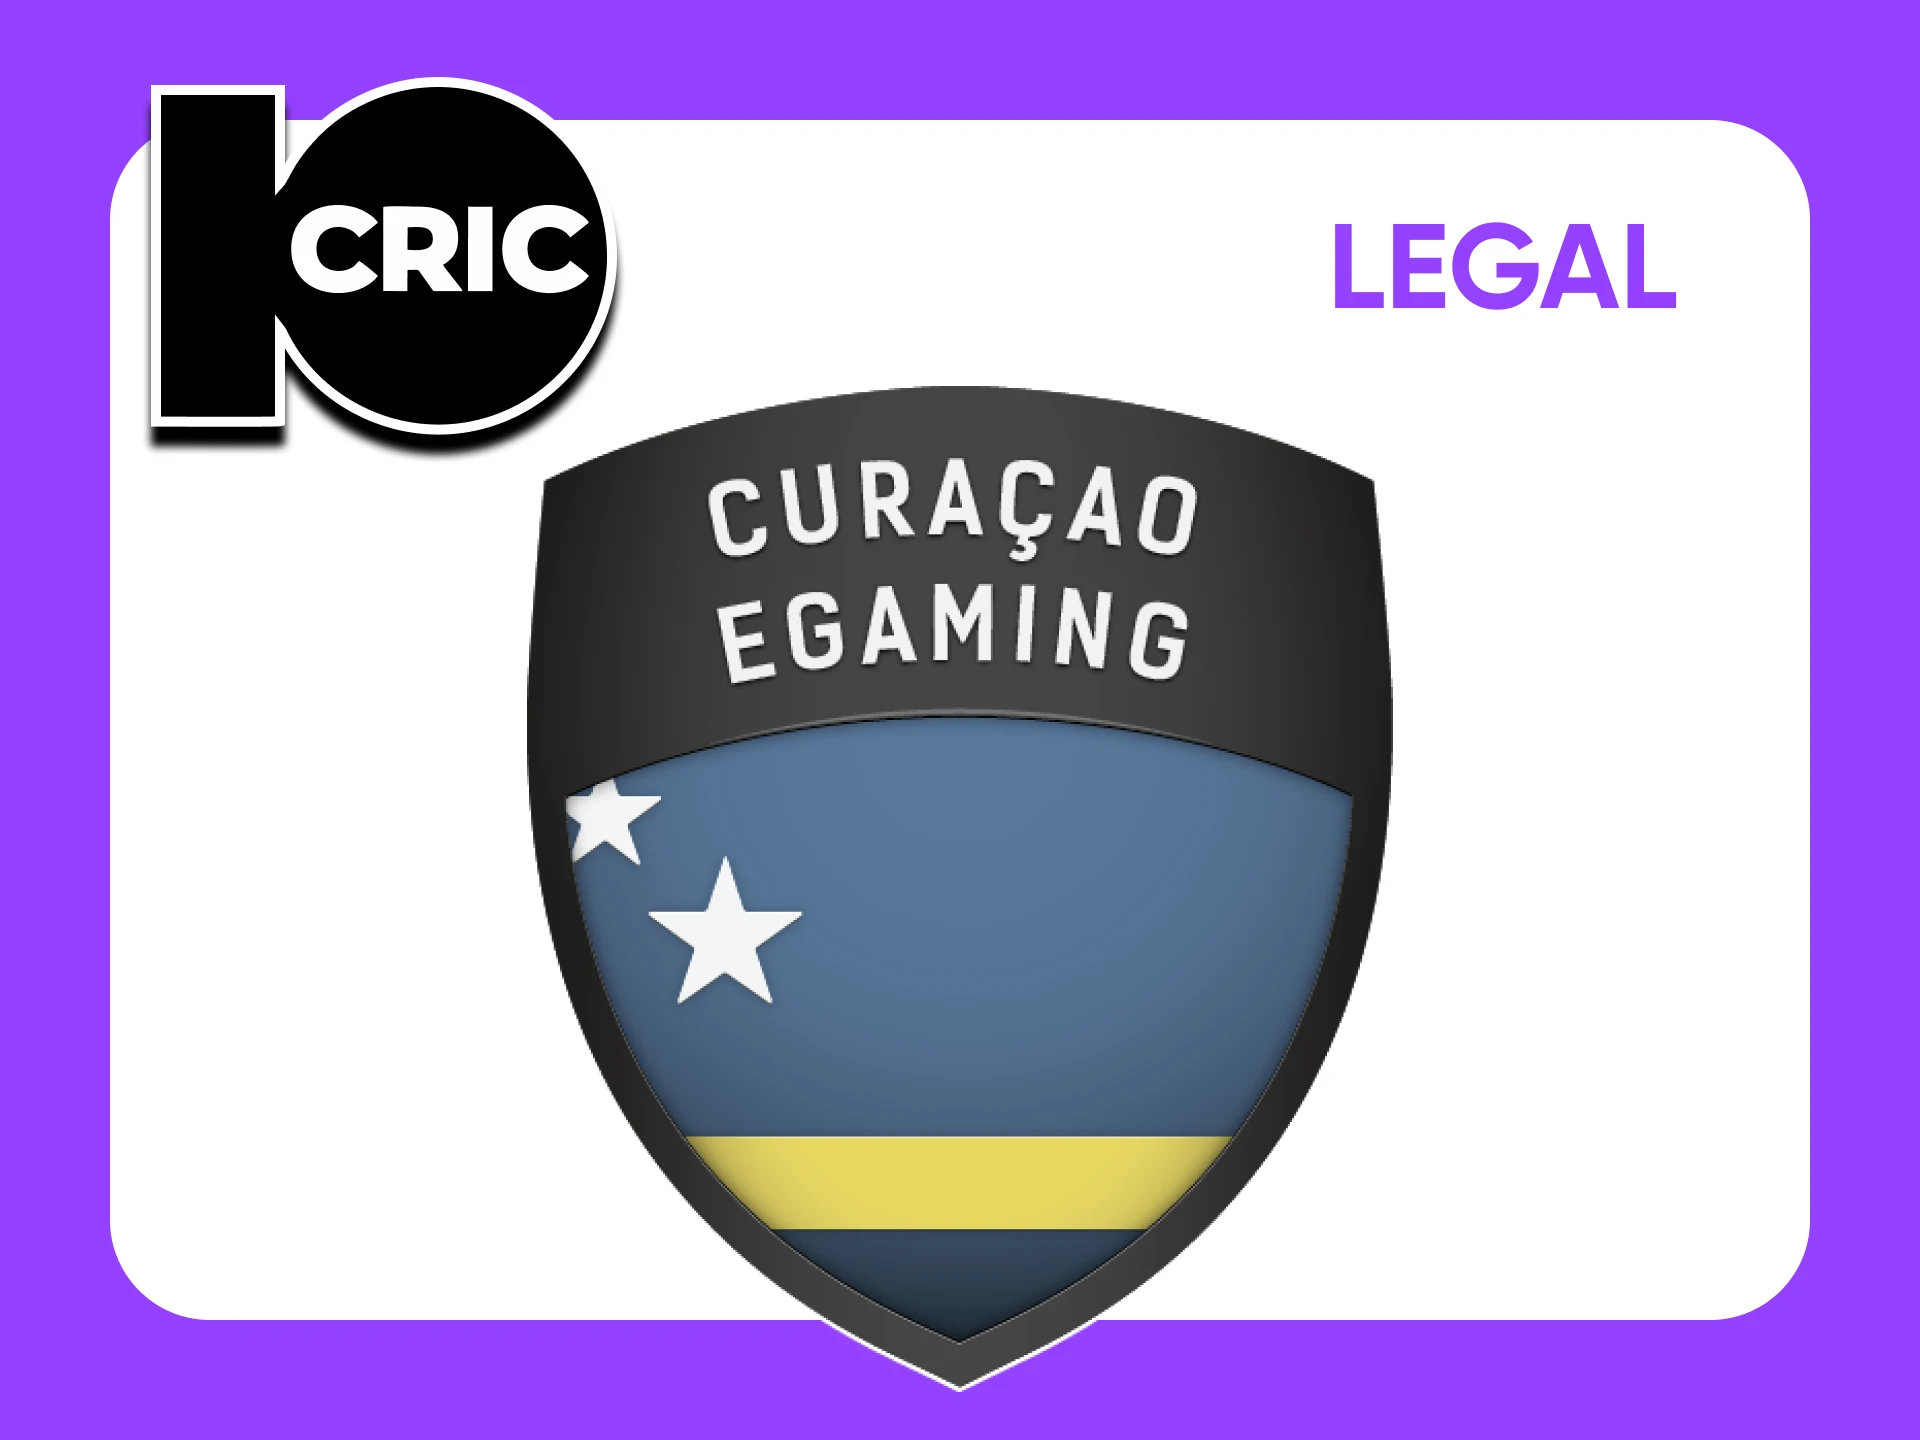 10cric is legal for users.